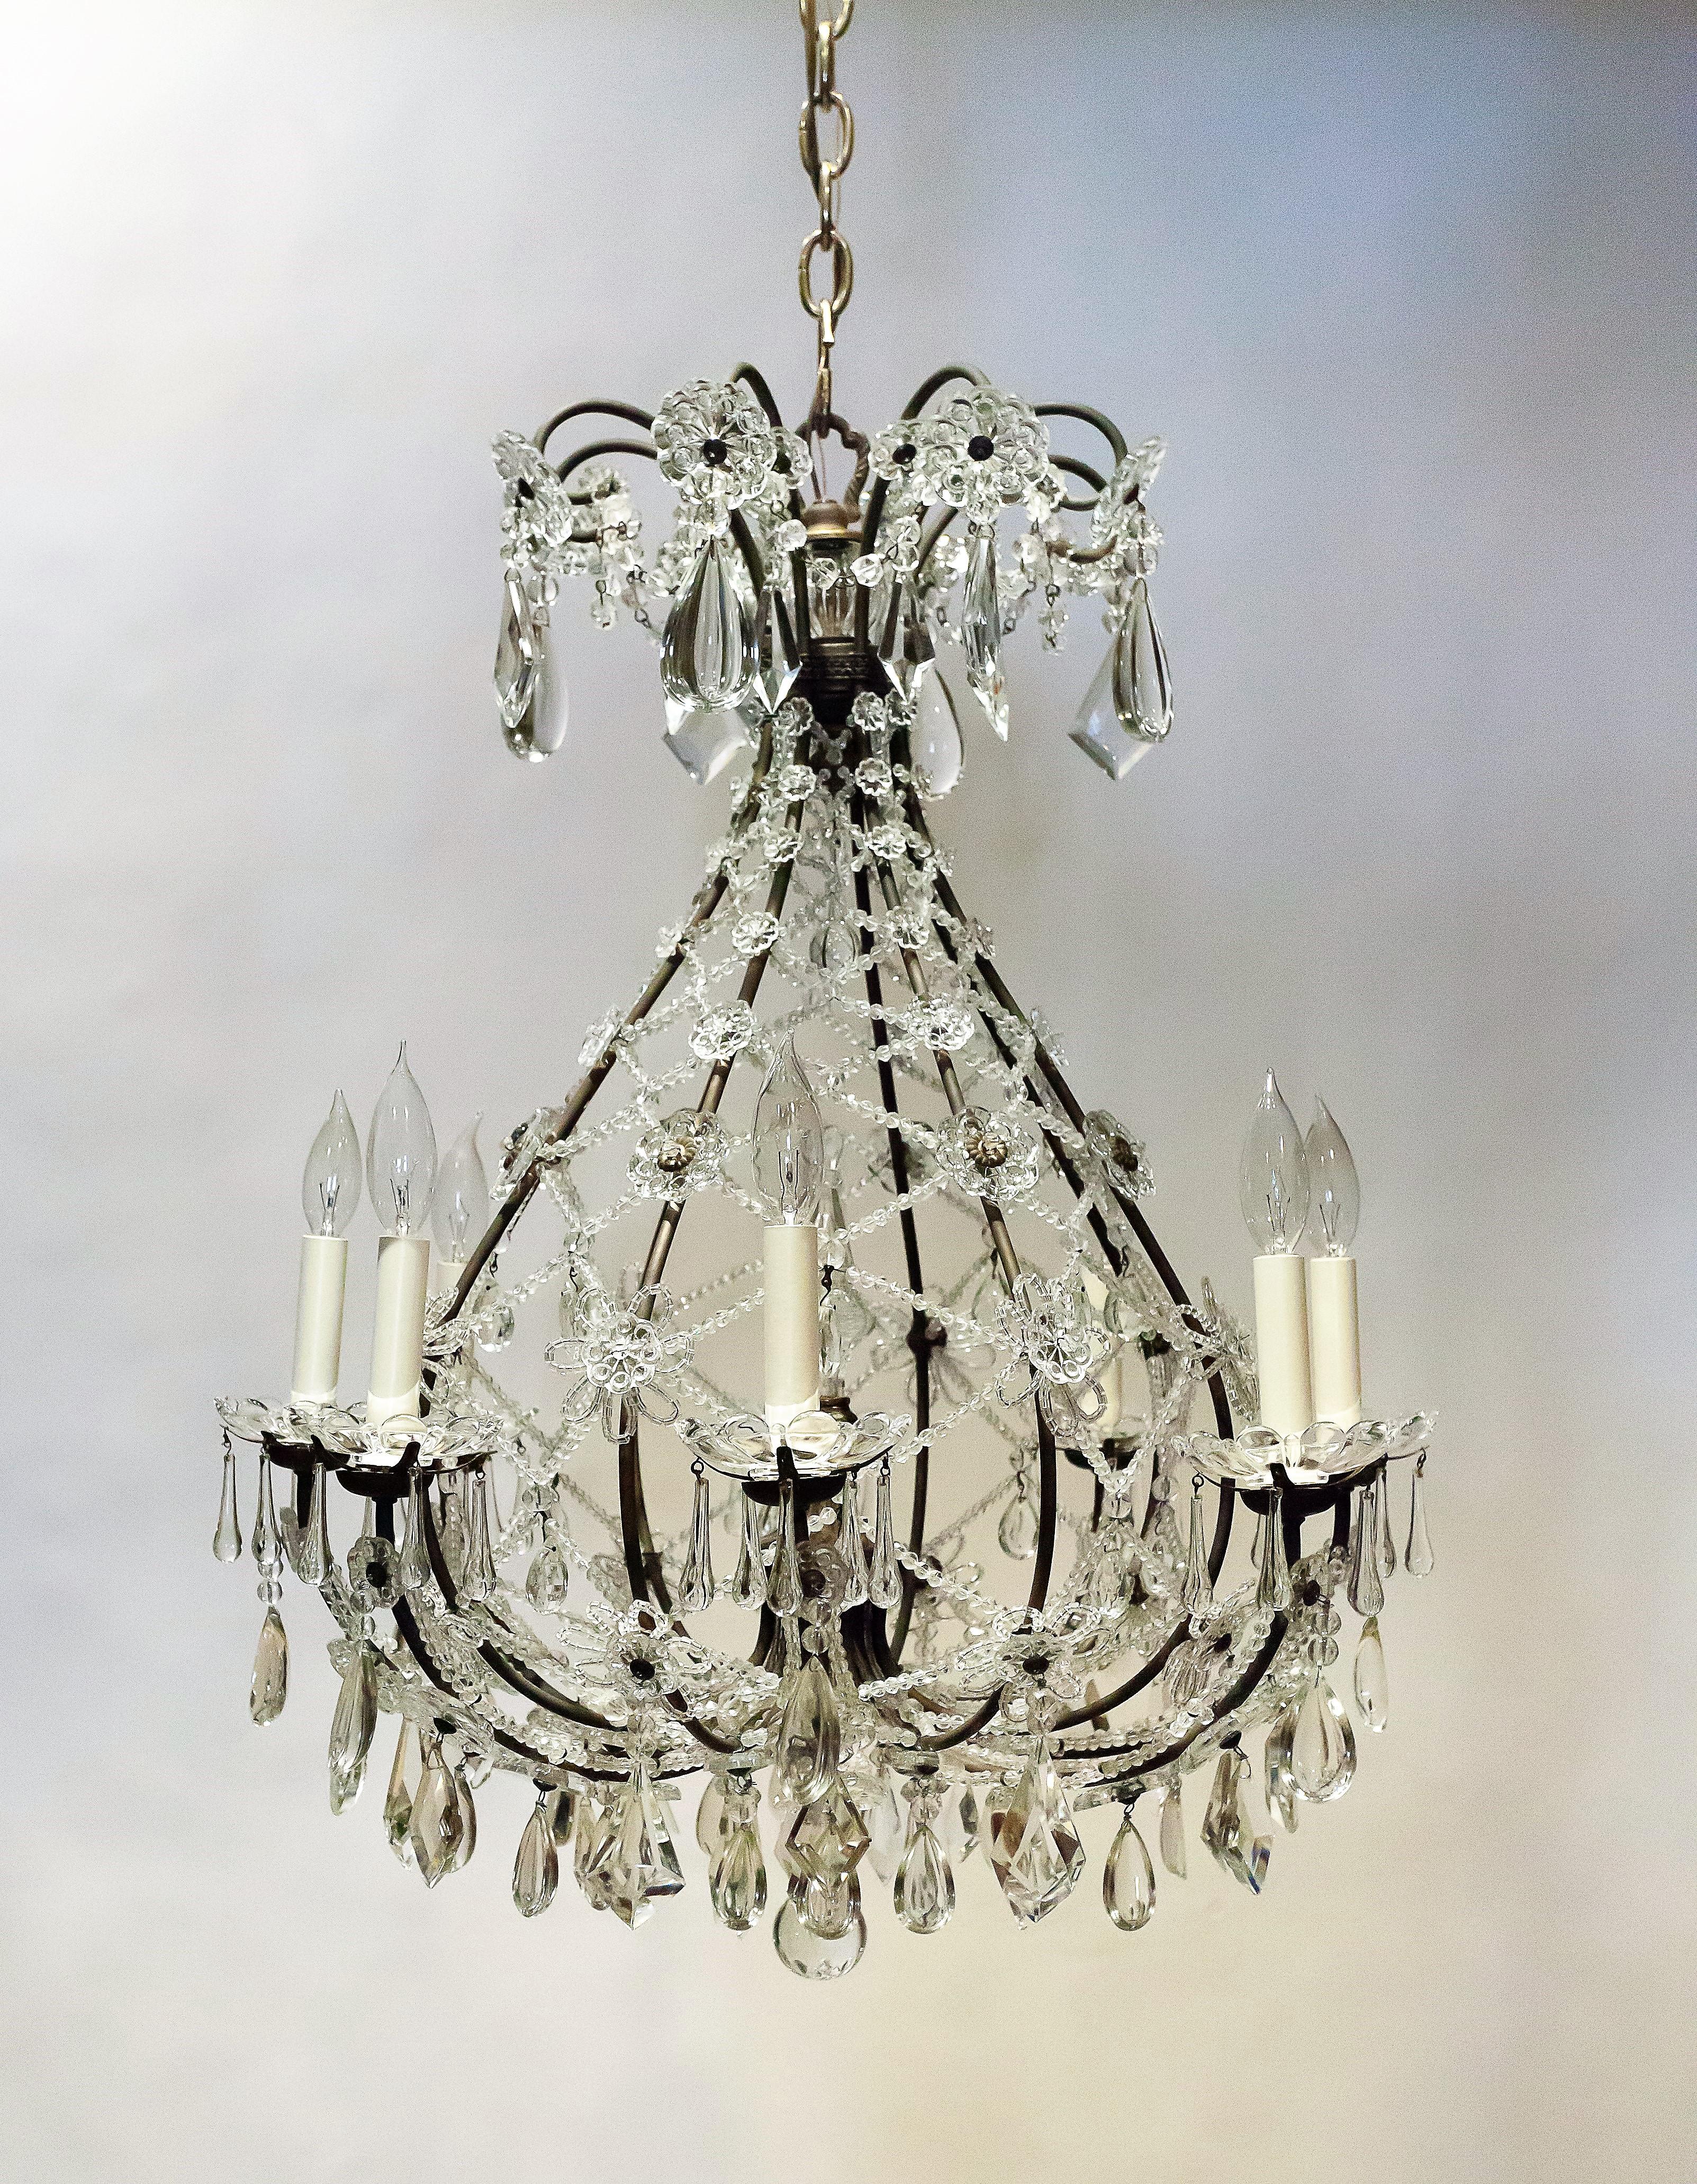 This whimsical inverted balloon fixture is an excellent example of a Neoclassical cage chandelier. While the original of the design was French, the intricate crystal bead work as well as the other ornament is the high quality work of Italian